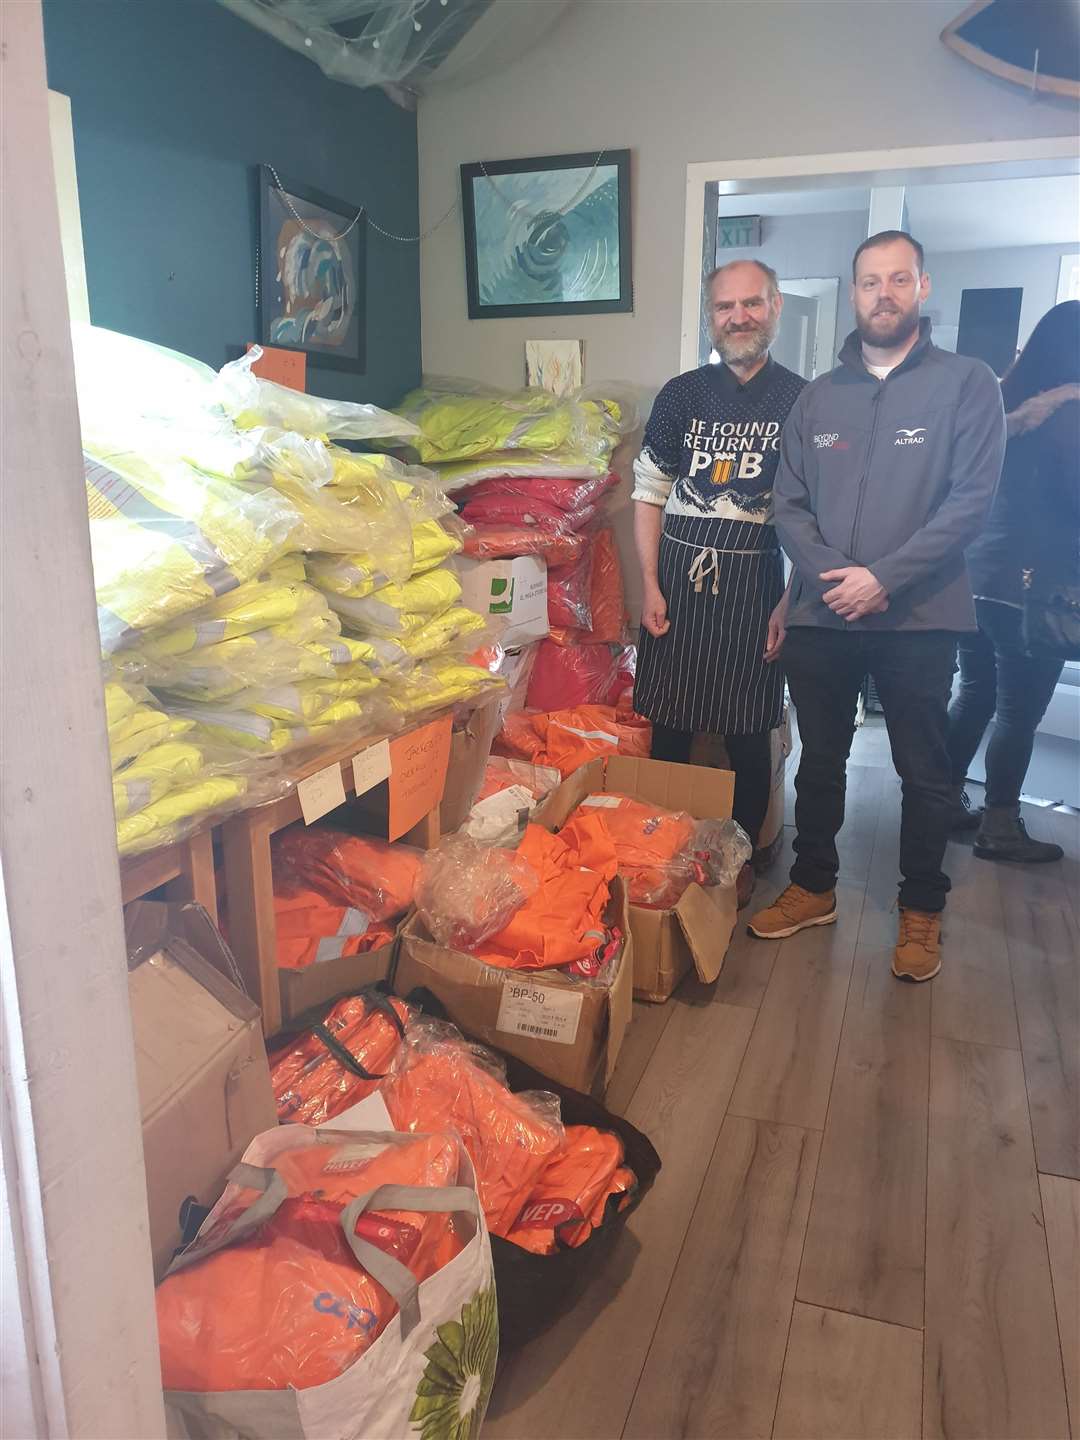 Thurso Community Café volunteer Andy Gearie (left) and scaffold foreman Billy Brock are pictured along with some of the personal protective equipment donated from the Aberdeen business unit of Altrad Services.